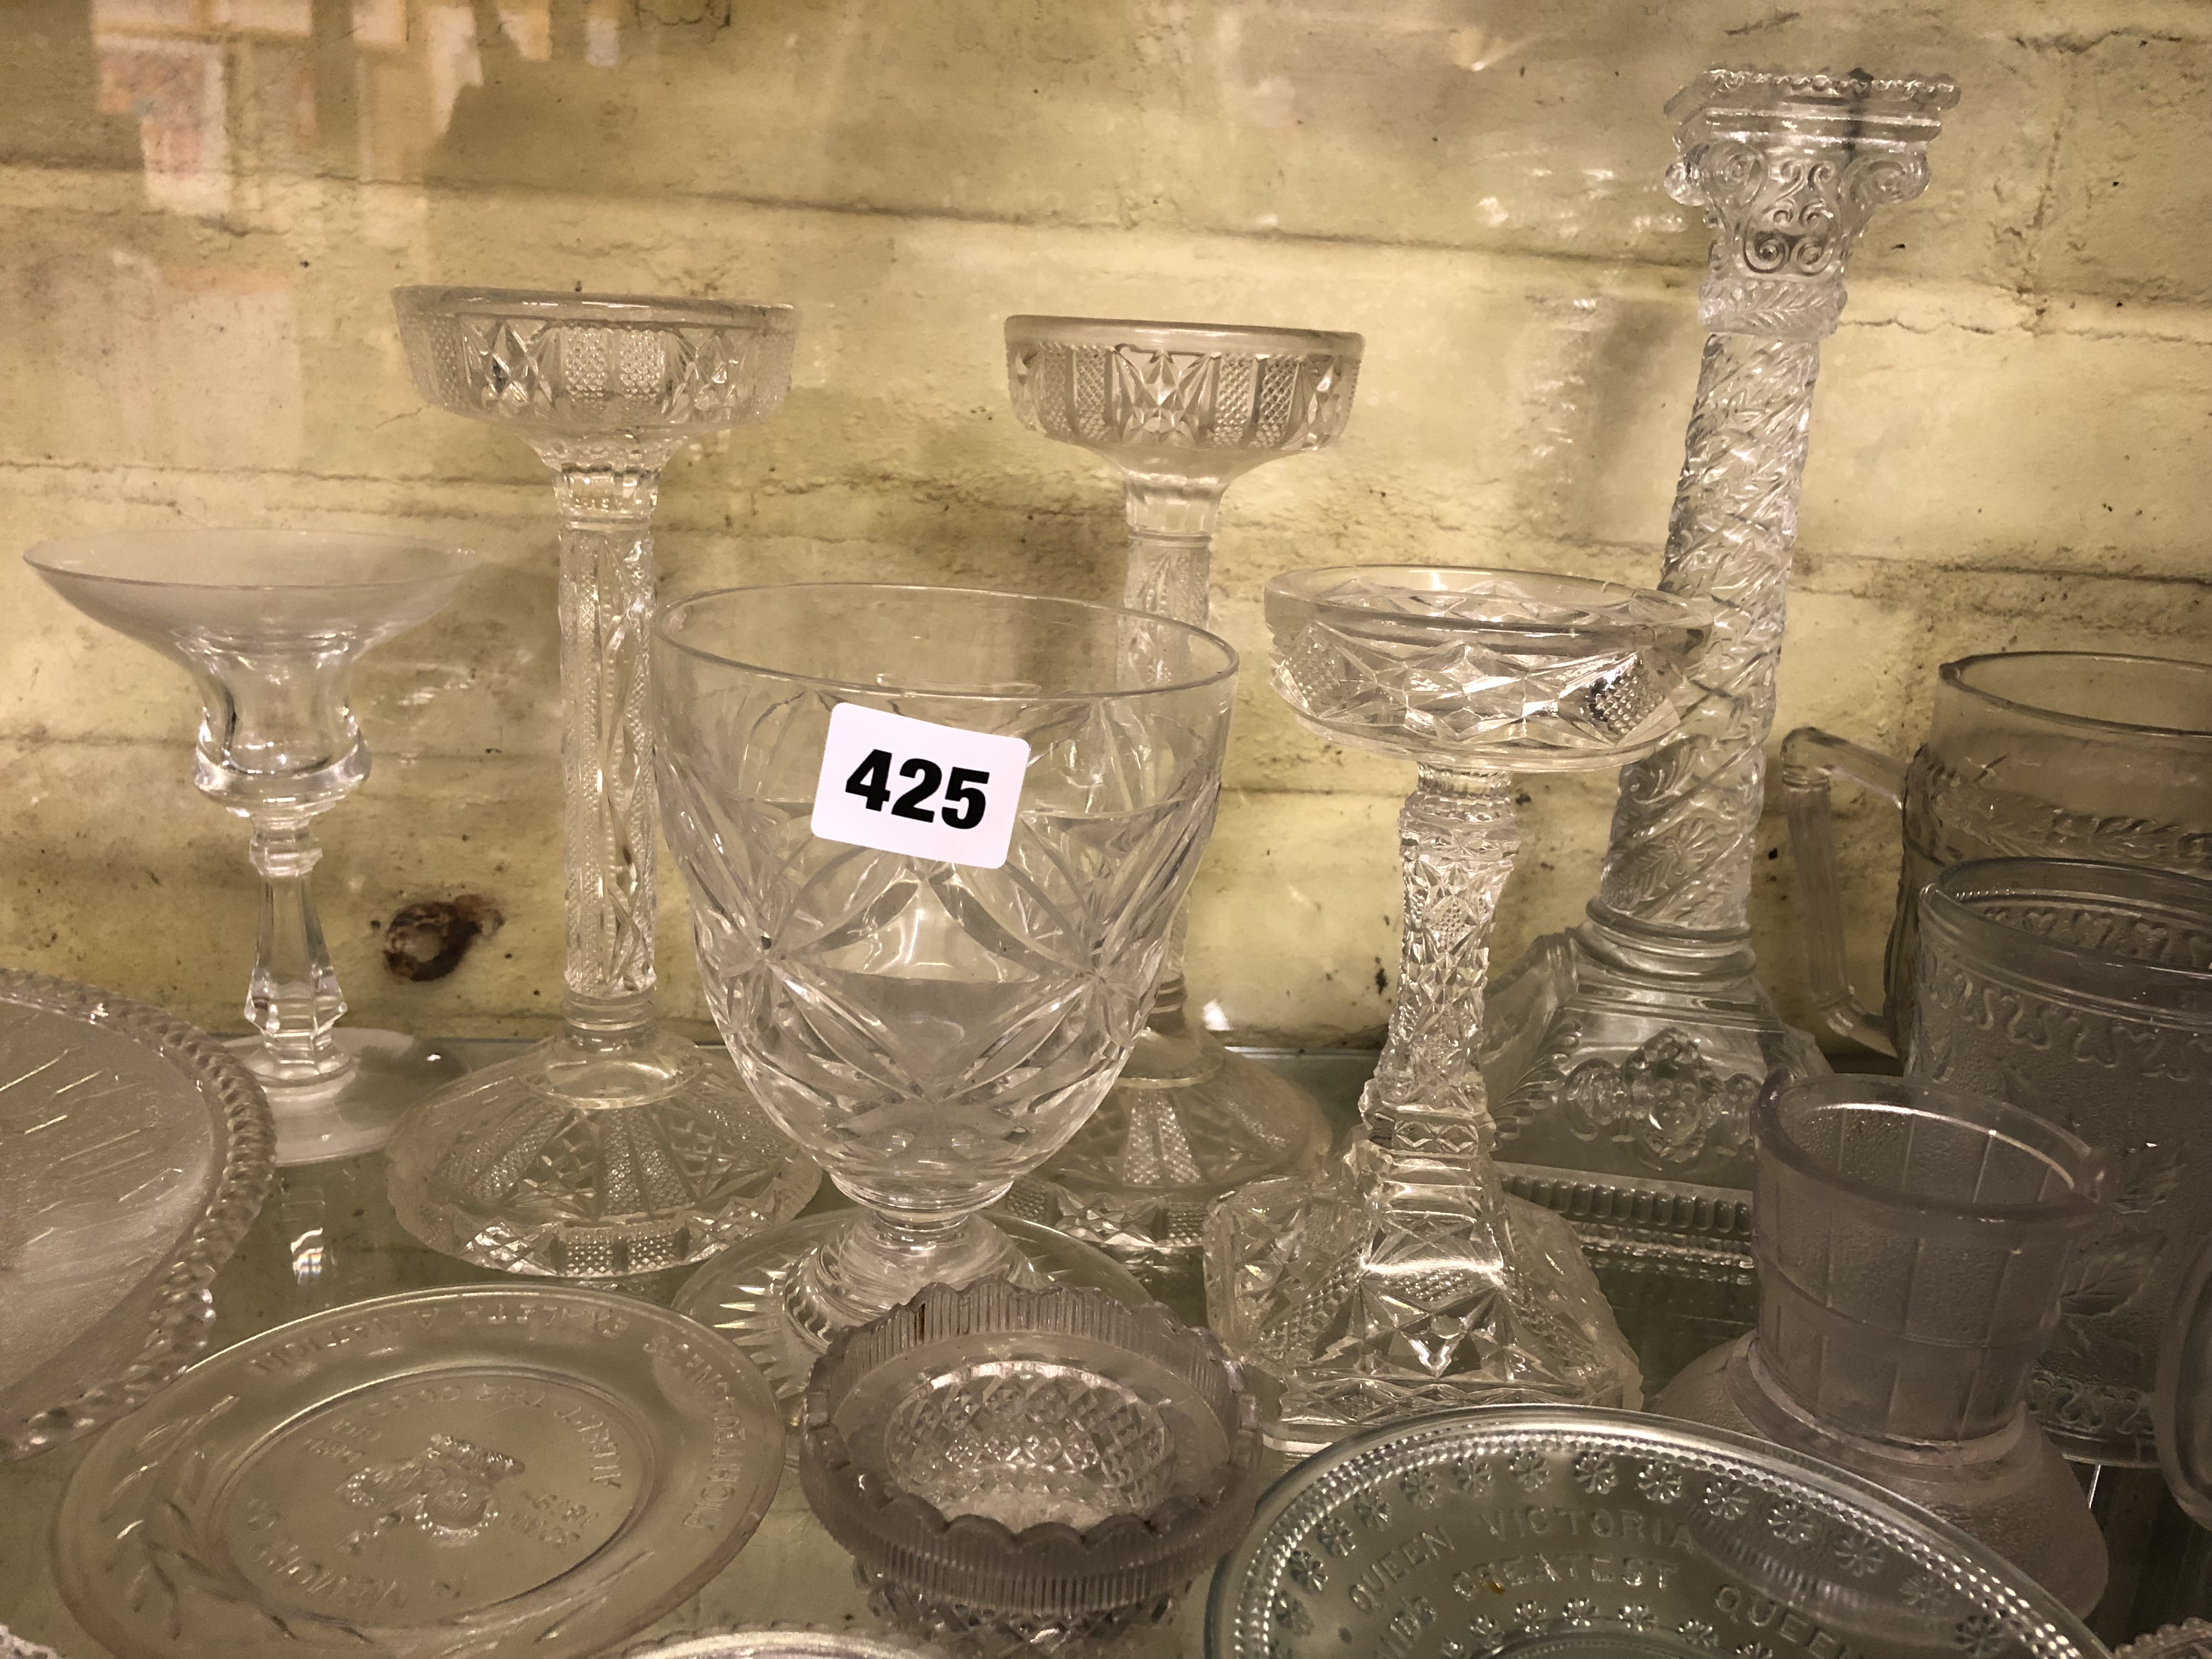 SELECTION OF MAINLY 19TH CENTURY PRESSED GLASSWARE BY SOWERBY, GREENER, SMALL COMMEMORATIVE DISHES, - Image 3 of 5